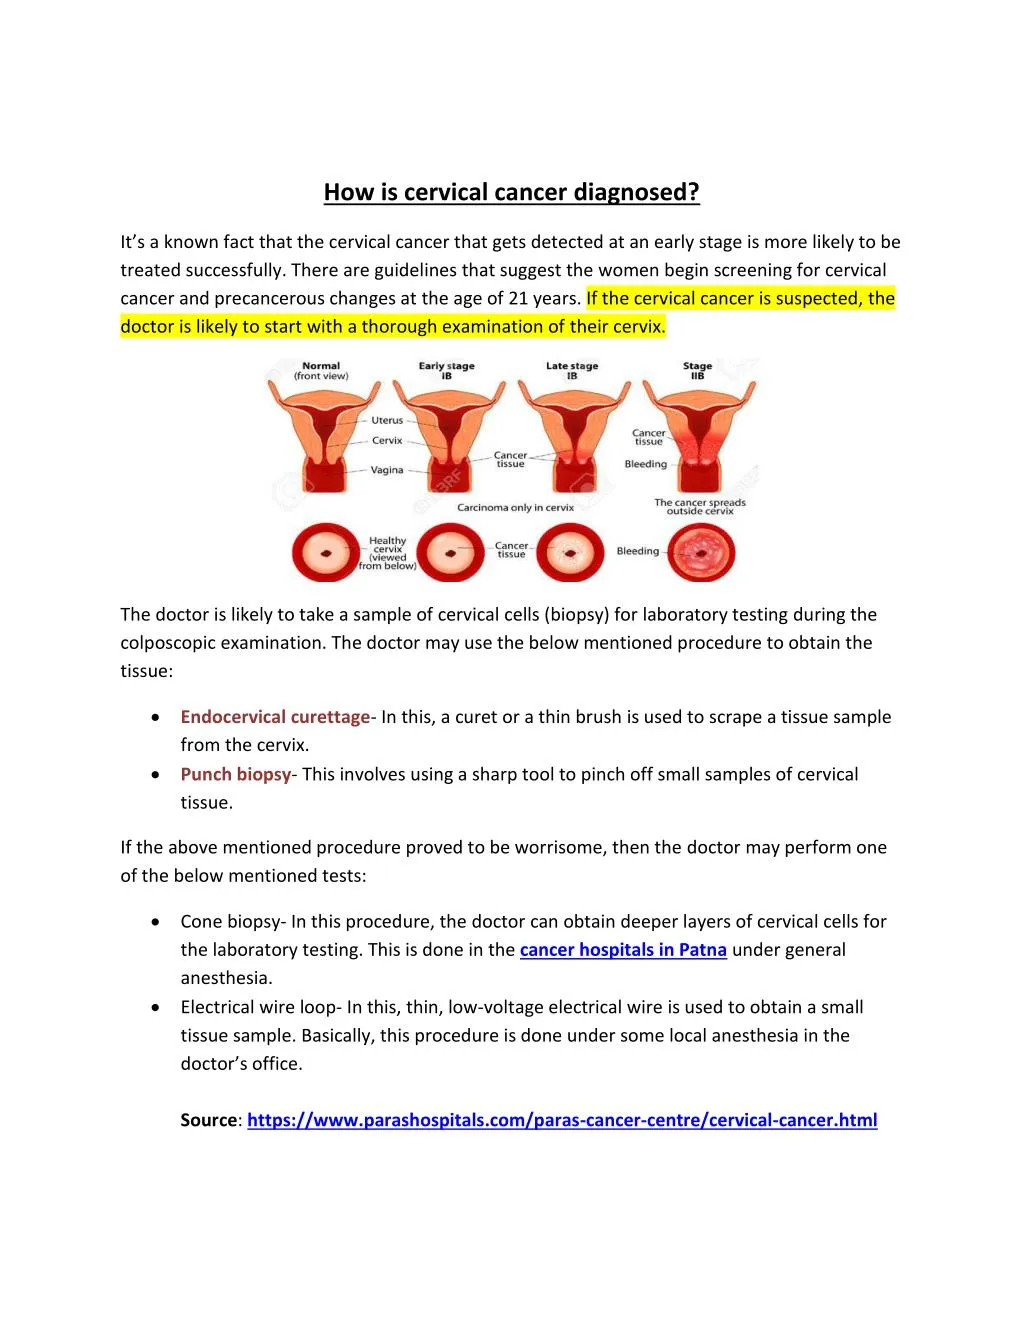 how is cervical cancer diagnosed